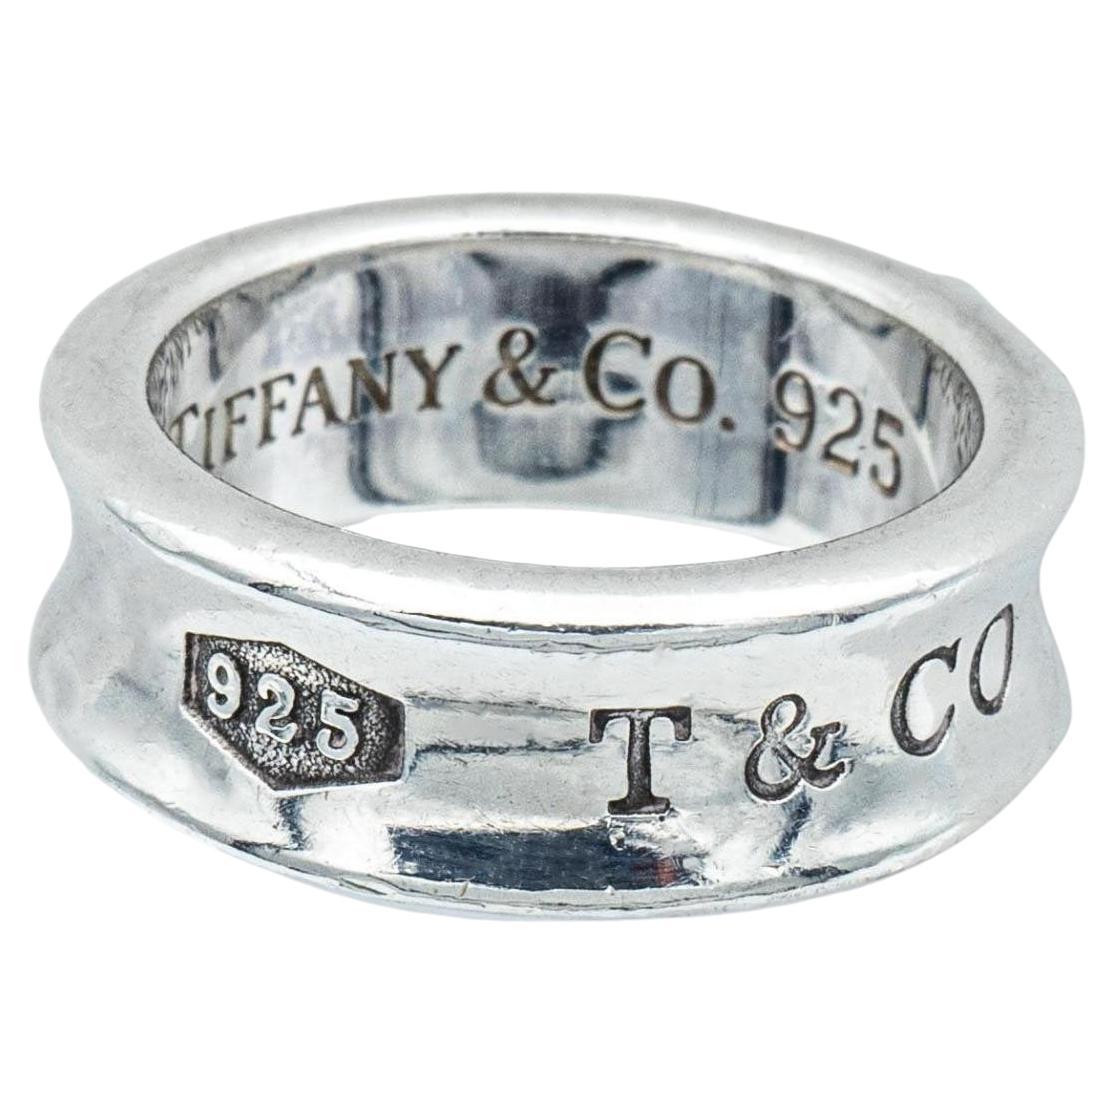 Tiffany & Co. 1837 Sterling Silver Band Vintage Ring, Medium Size